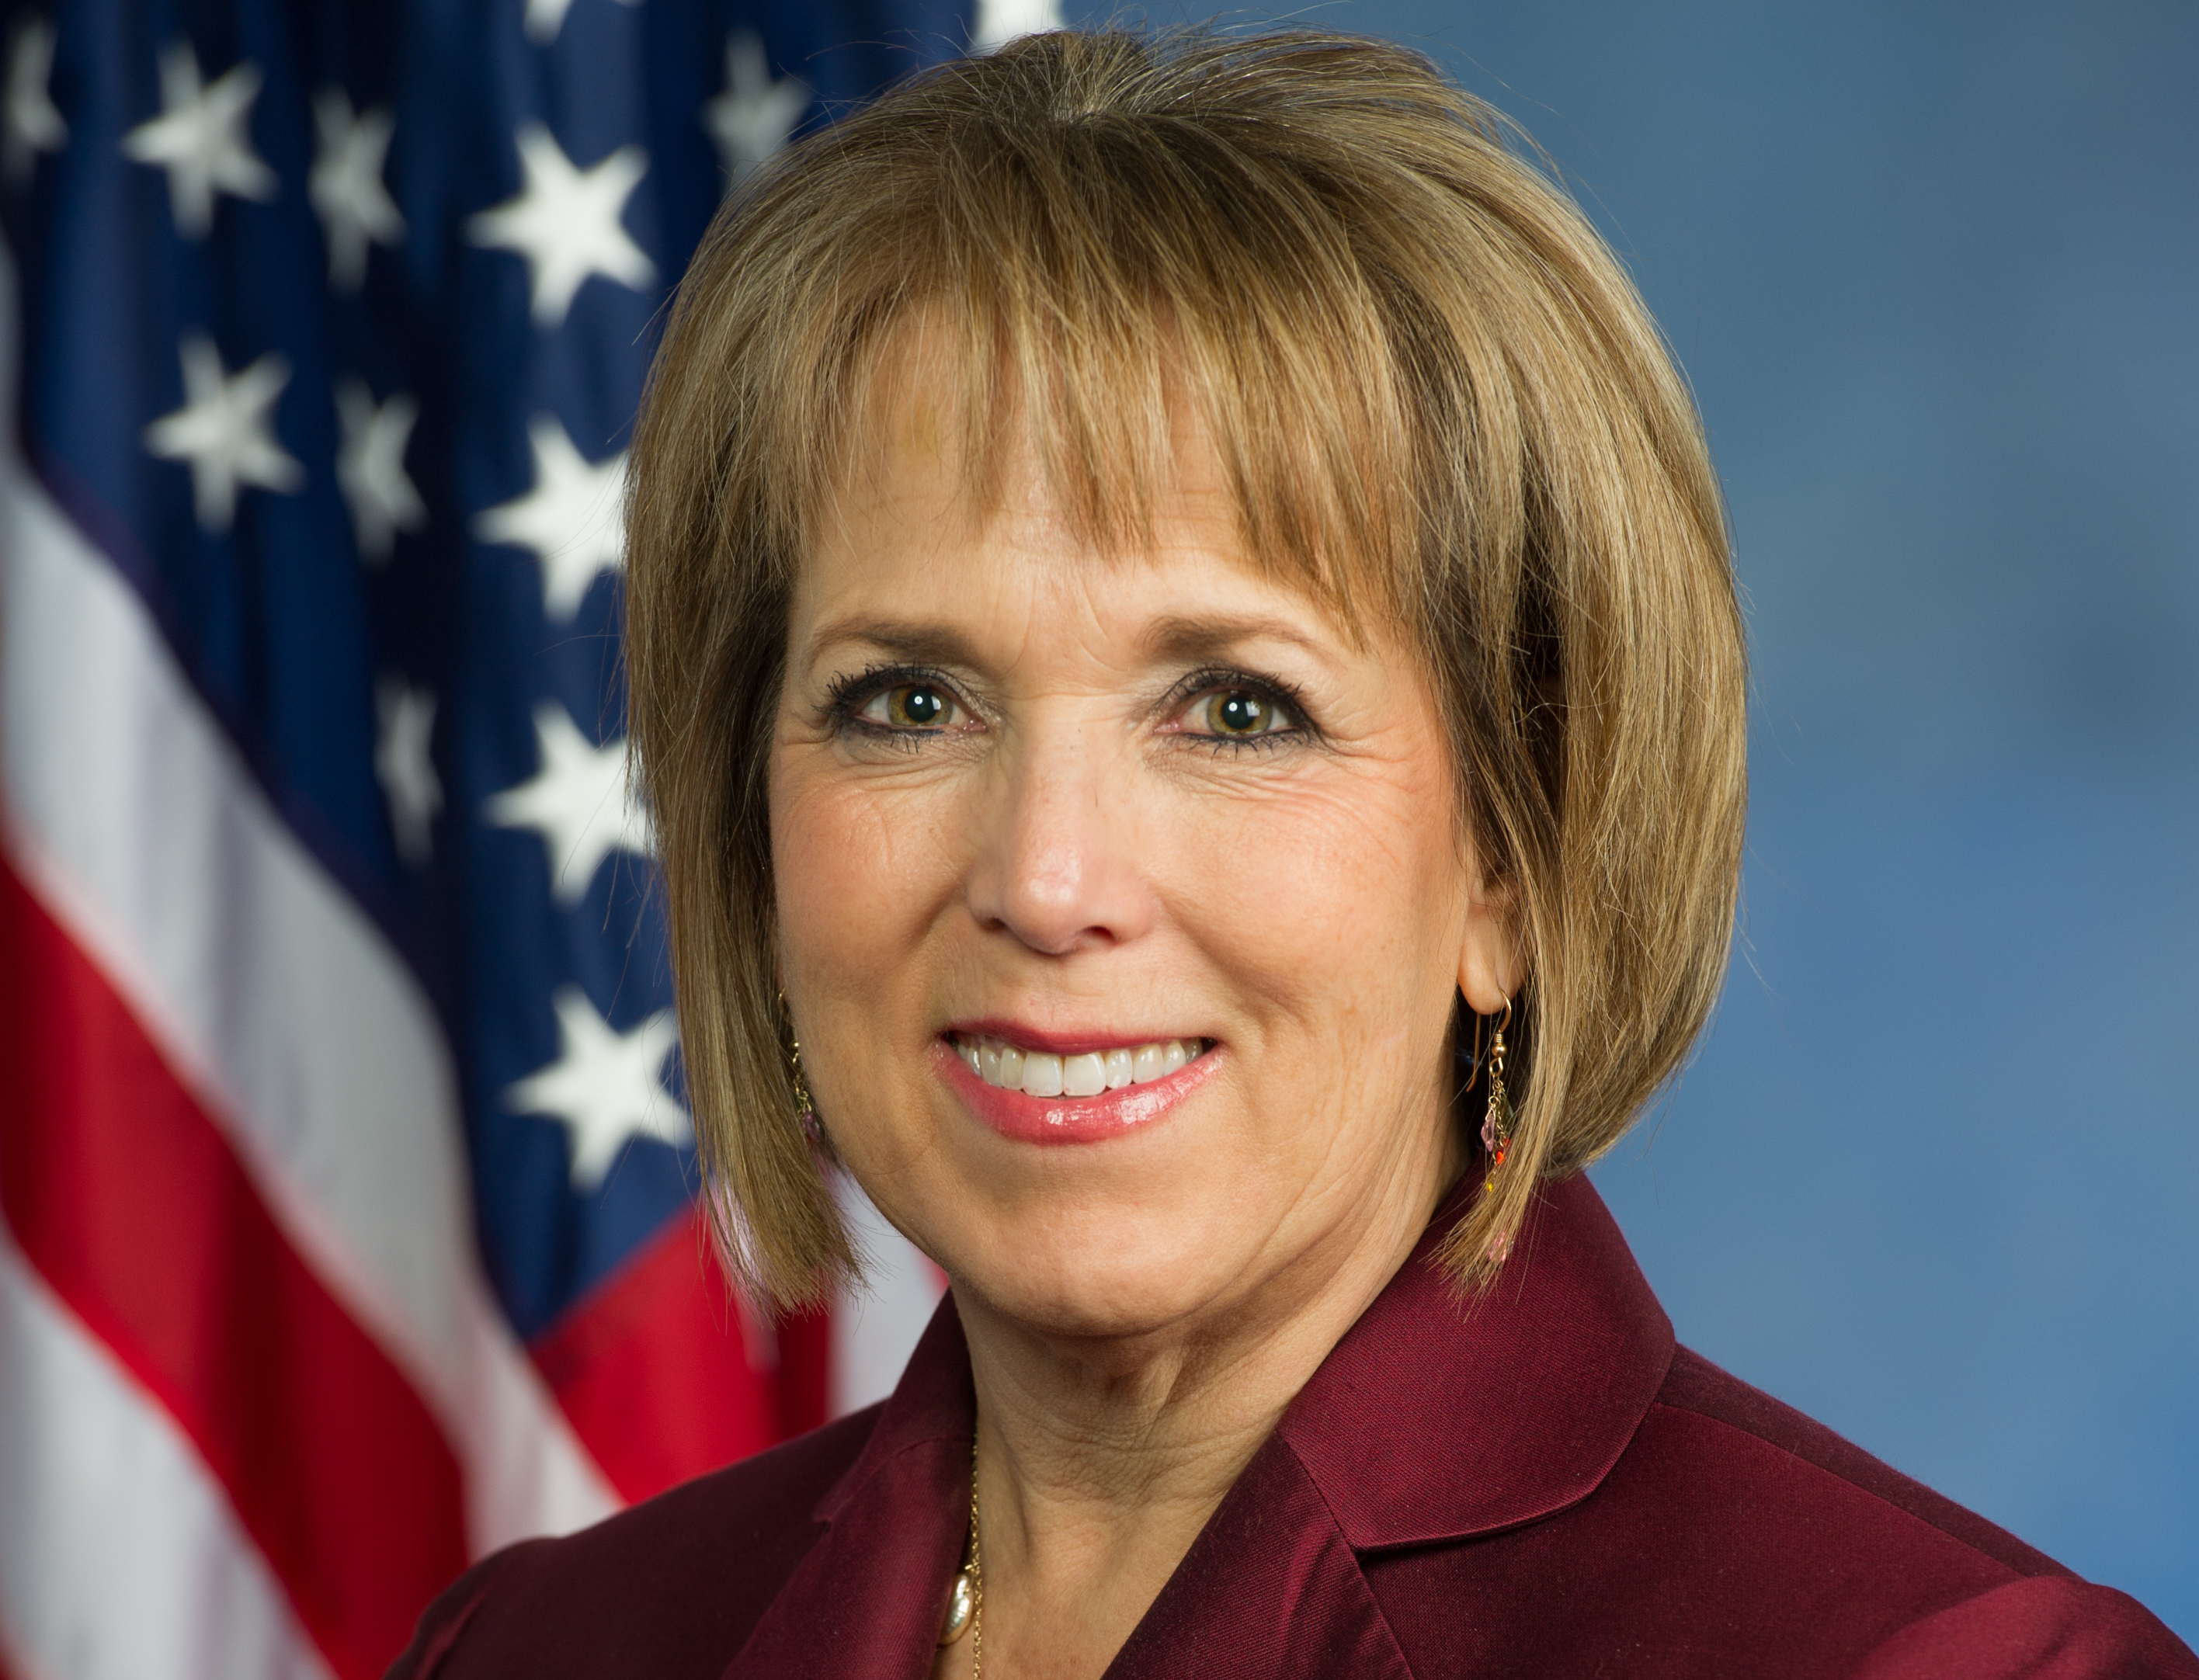 Michelle Lujan Grisham official photo, United States Congress/Wikimedia Commons